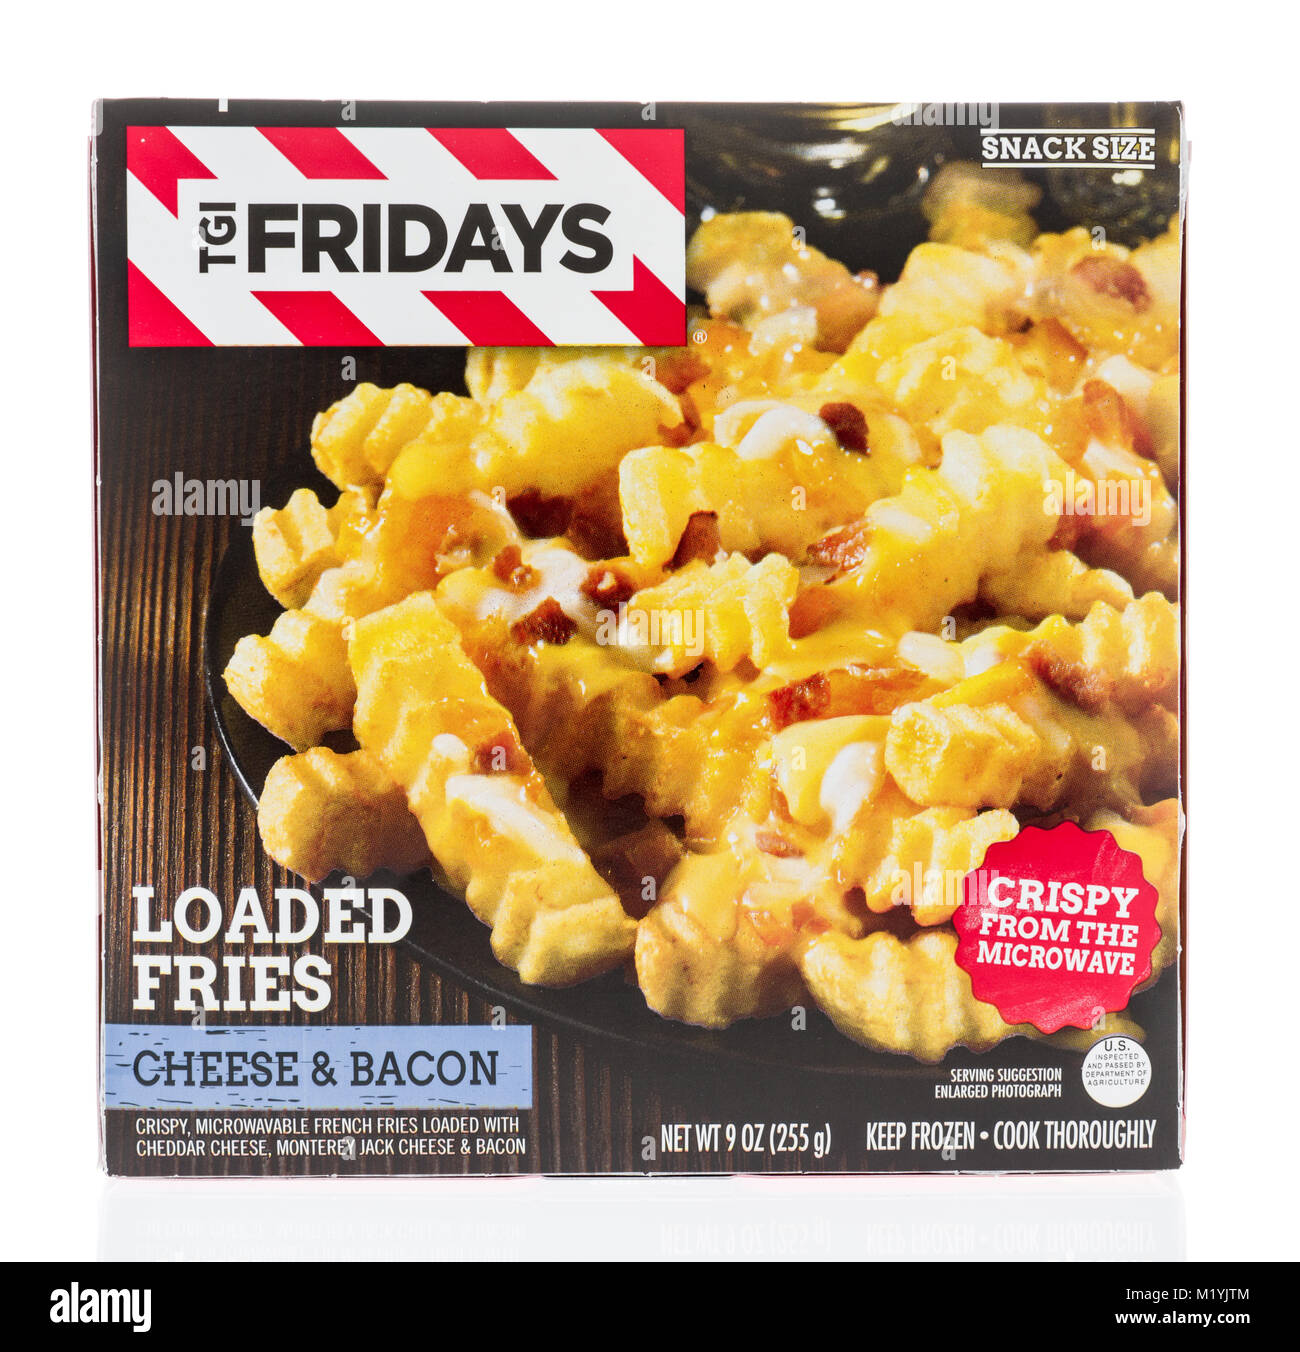 Winneconne, WI - 31 January 2018: A package of TGI Fridays loaded fries in cheese and bacon flavor on an isolated background. Stock Photo